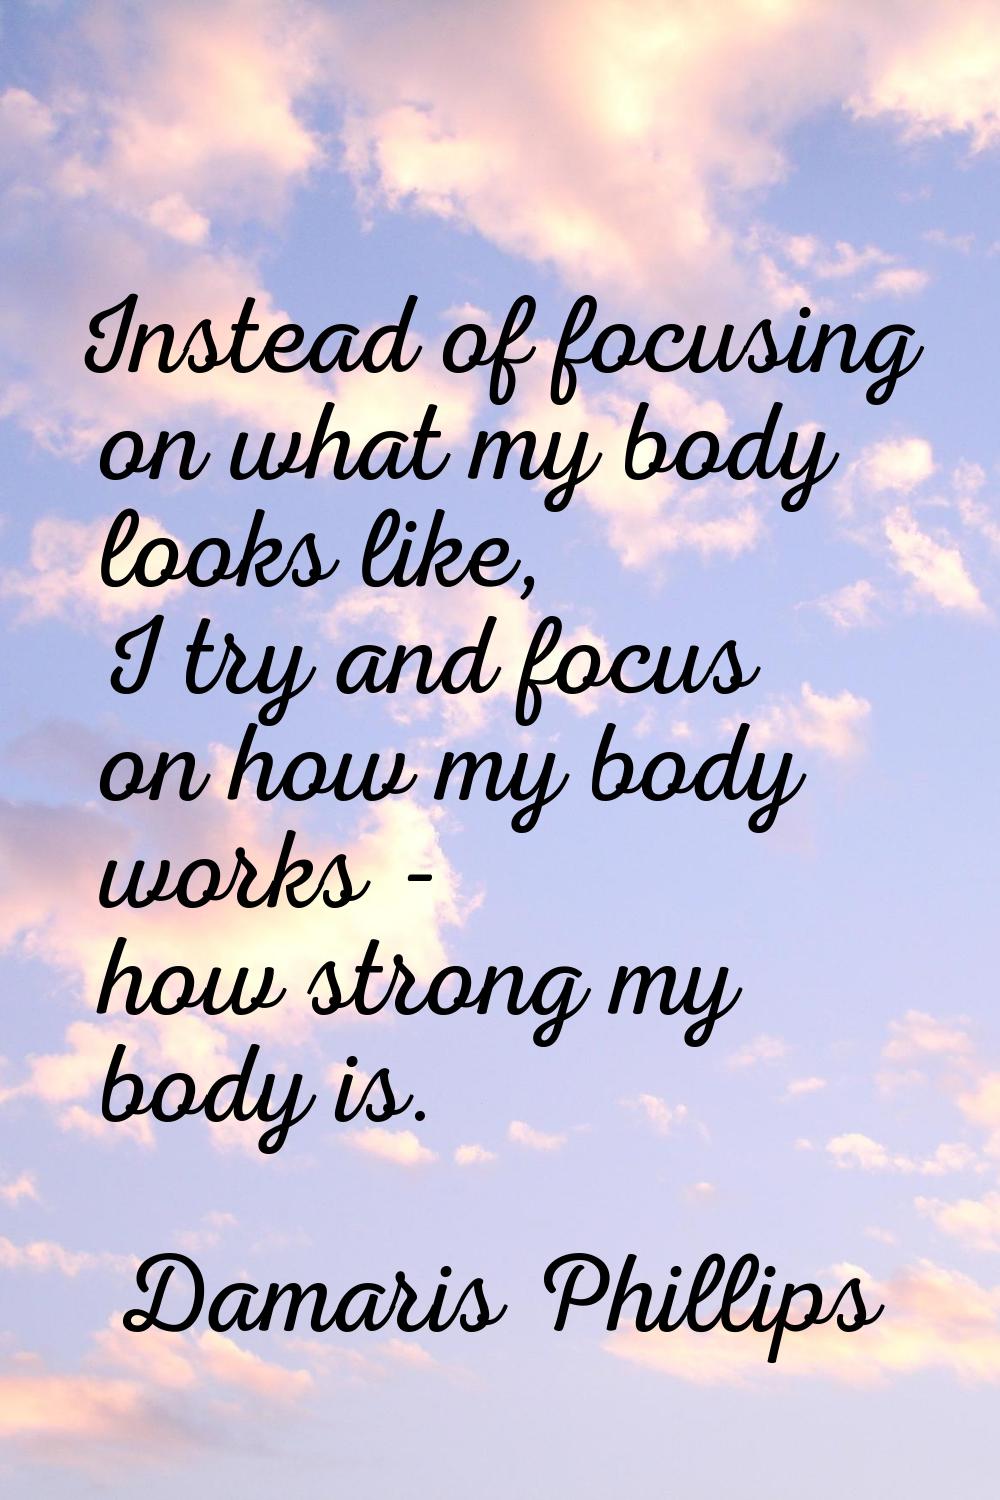 Instead of focusing on what my body looks like, I try and focus on how my body works - how strong m